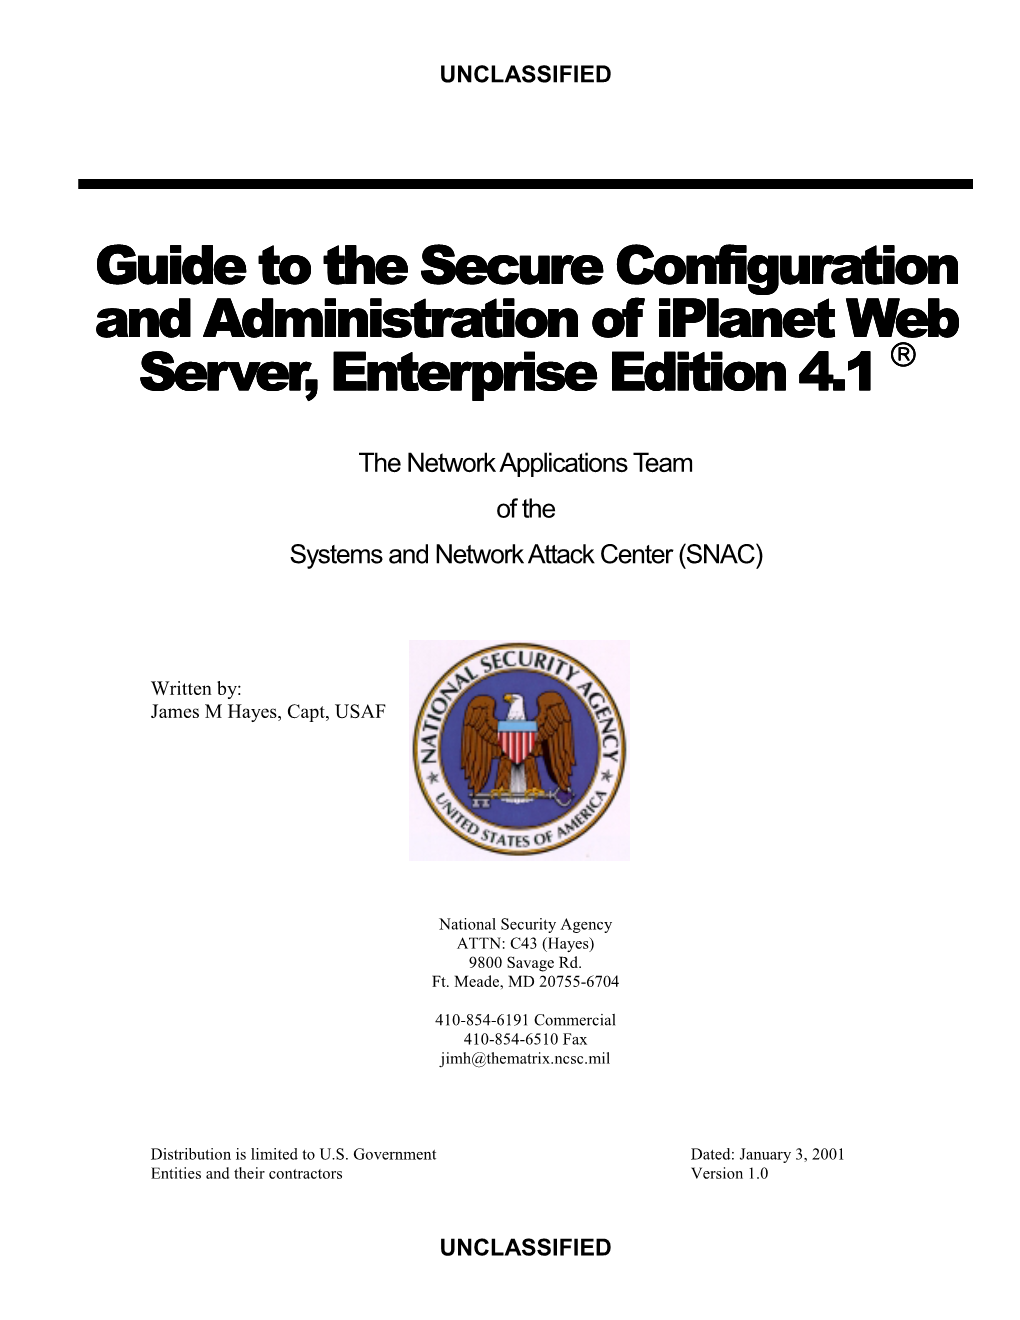 Guide to the Secure Configuration and Administration of Iplanet Web Server, Enterprise Edition 4.1